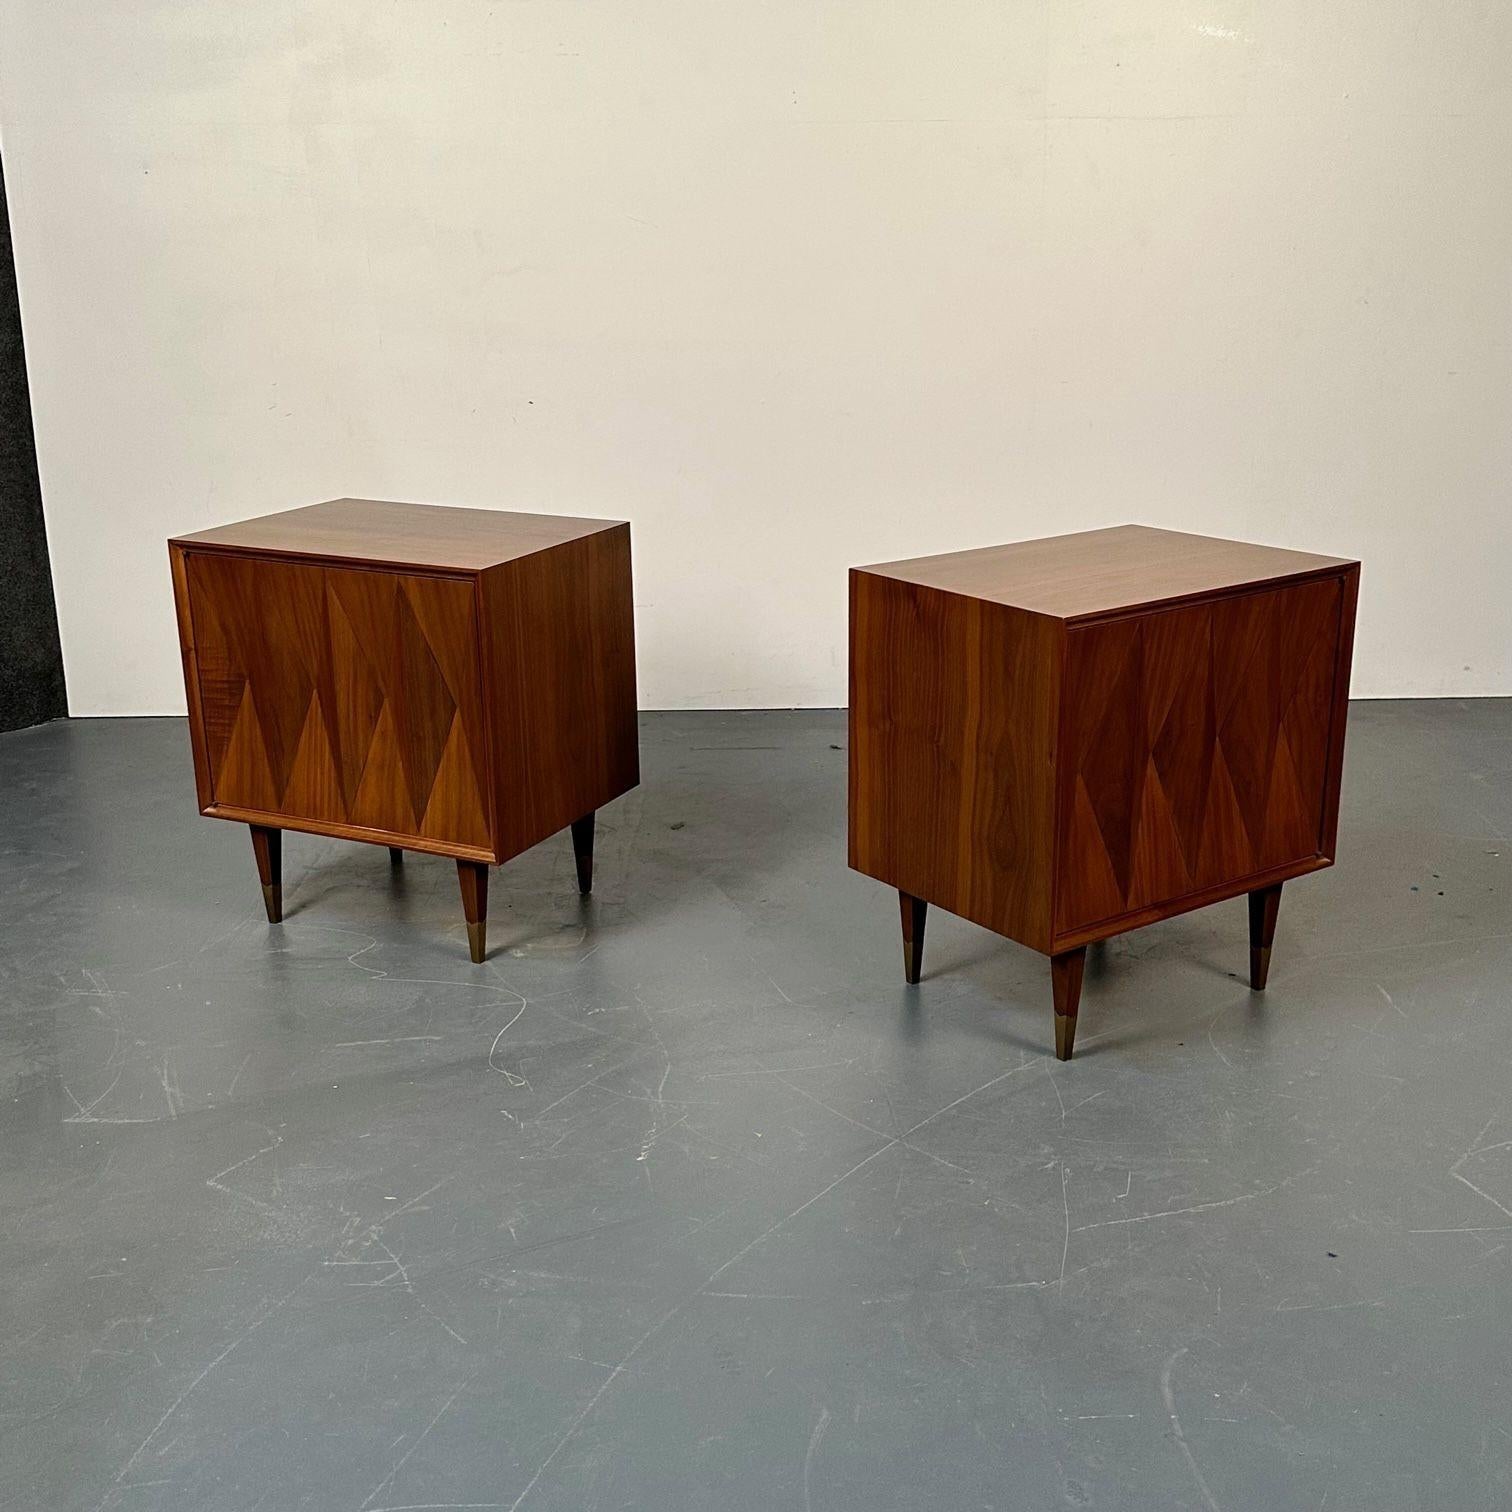 Pair of Danish Mid-Century Modern style Geometric Nightstands, walnut, brass
 
A finely polished Mid Century pair of bedside stands each having a geometric shaped front. 
 
Walnut, Brass
United States, 2000s
 
Measures: 24.25H x 21W x 16D 
